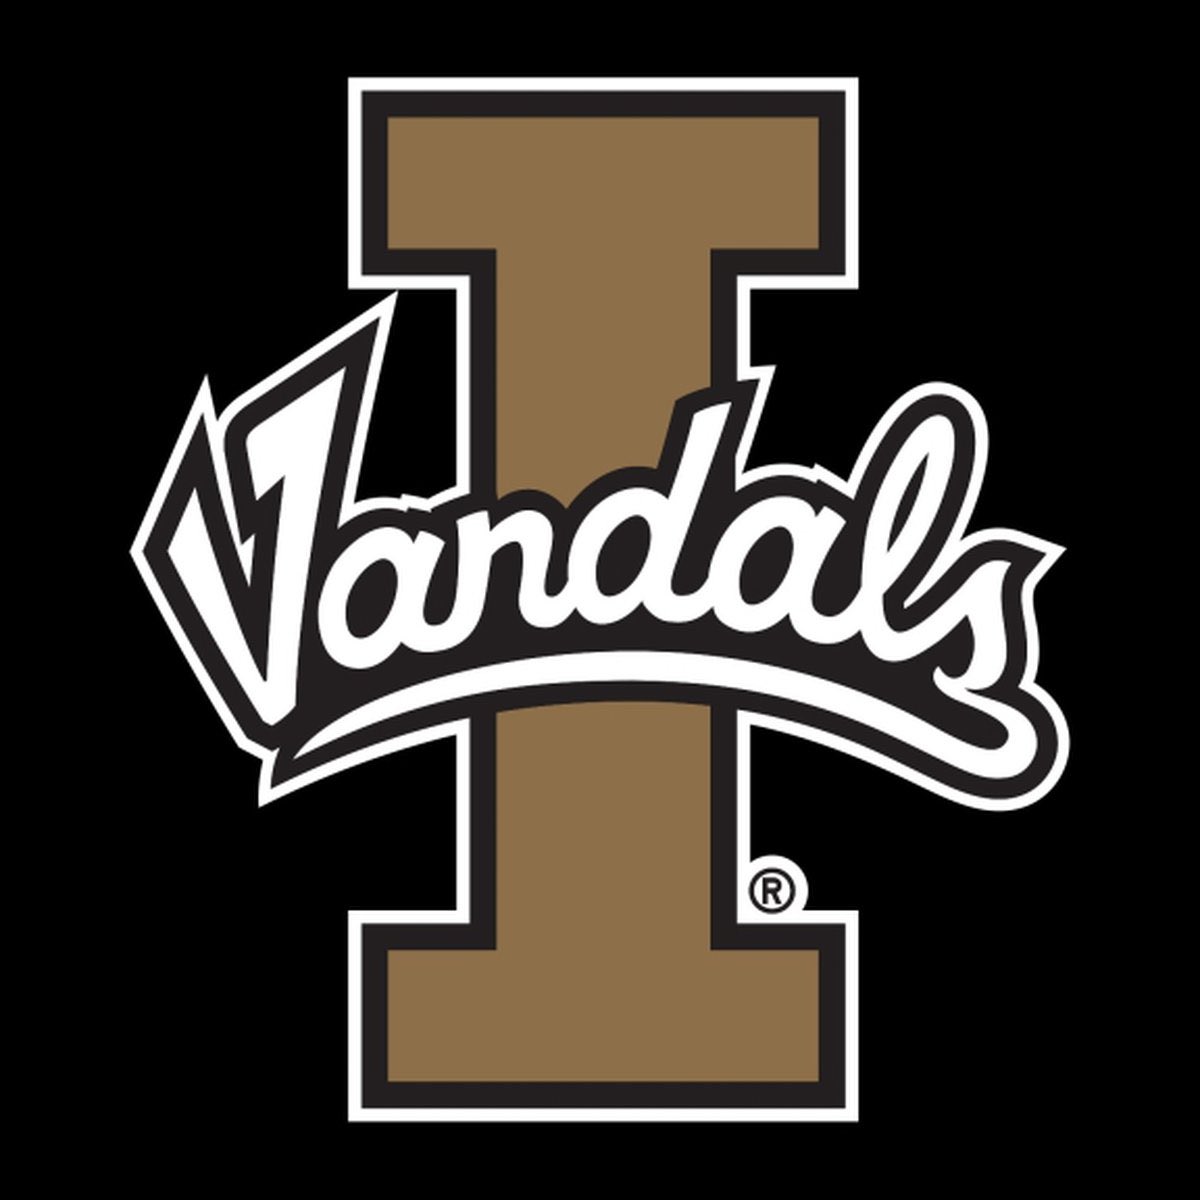 Thank you so much to the new @VandalsWBB coaches, @CoachEighmey & @Coach_Eighmey for the renewed offer to be a Vandal!